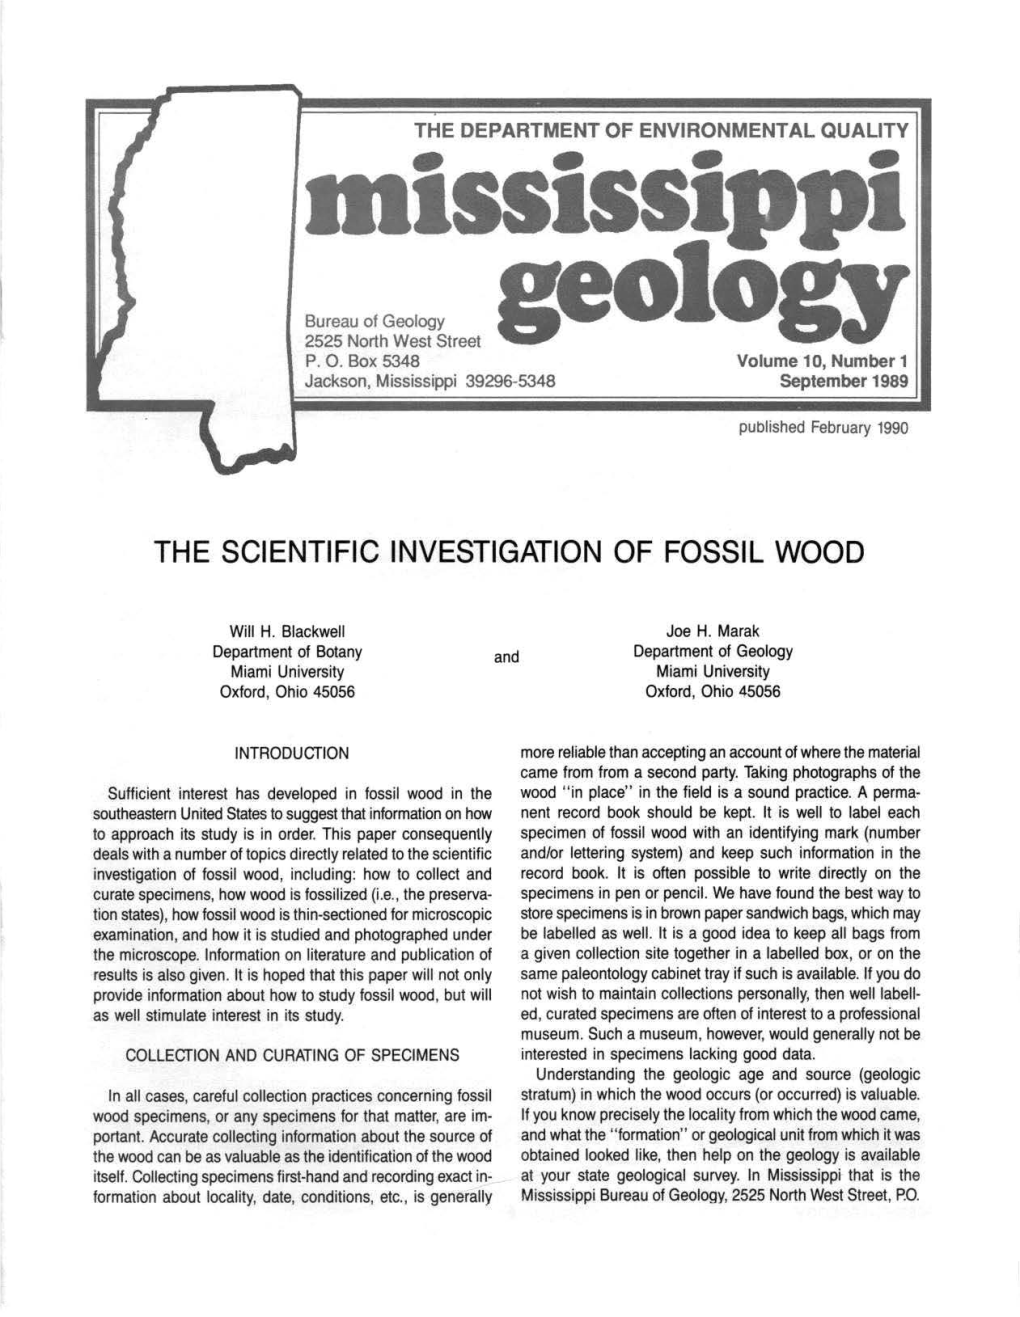 The Scientific Investigation of Fossil Wood